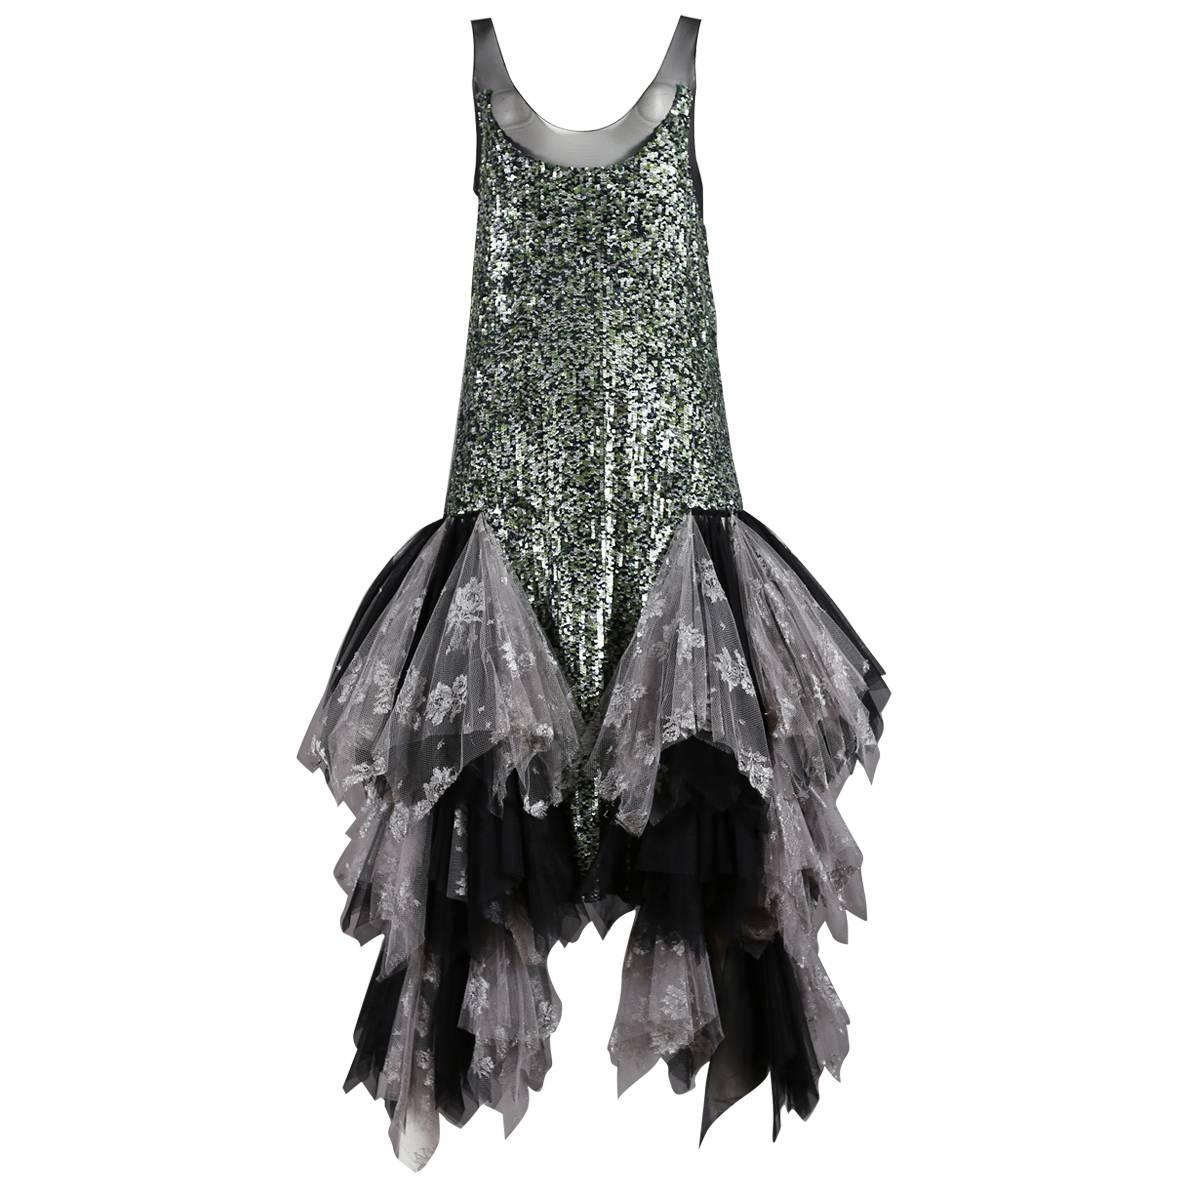 Alexander McQueen sequined flapper dress with tulle skirt, circa 2001